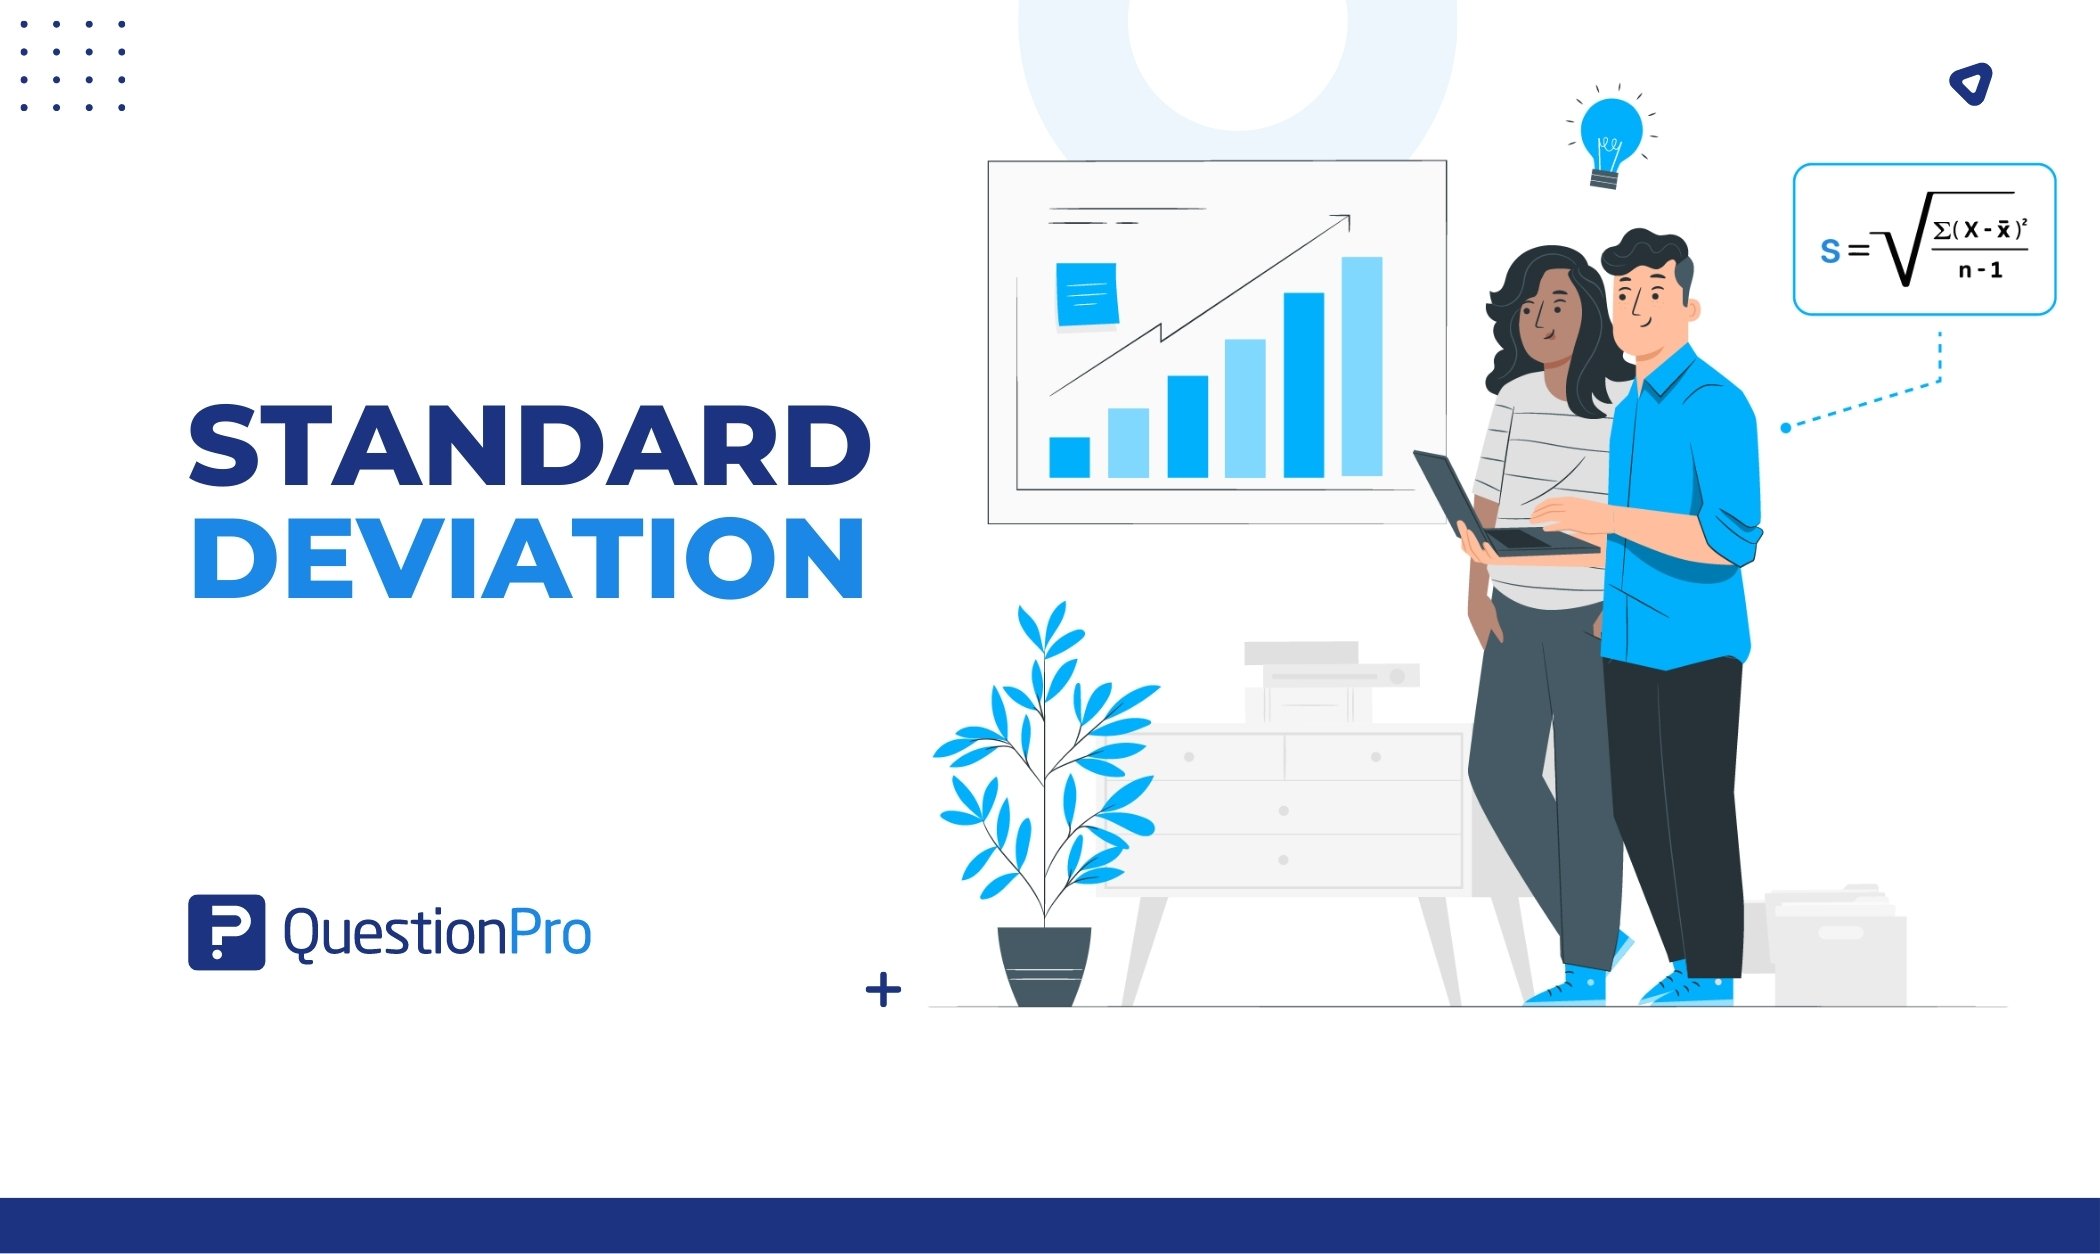 The standard deviation measures descriptive statistics variability. It is for calculating difference between individual data and the mean.